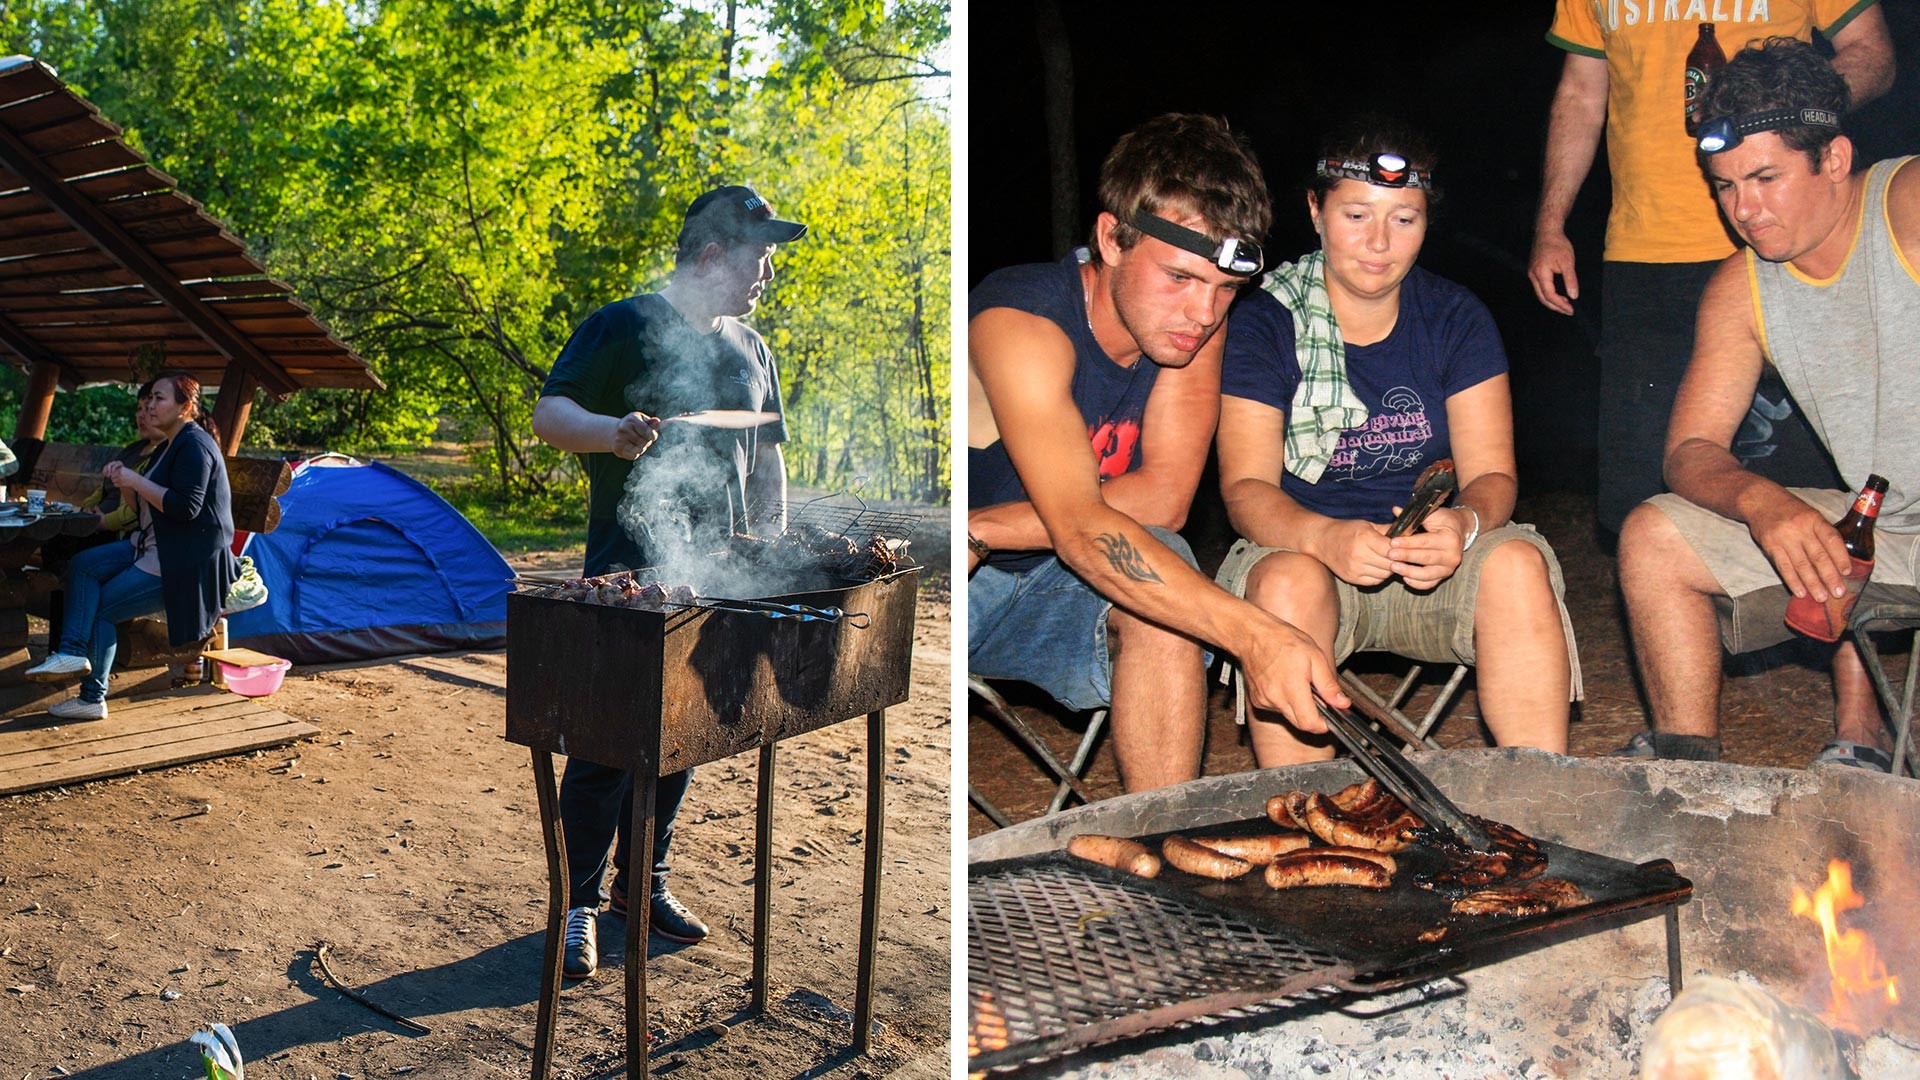 Left: Muscovites make shashlyk at the park. Right: Locals in Australia make a nice BBQ evening.